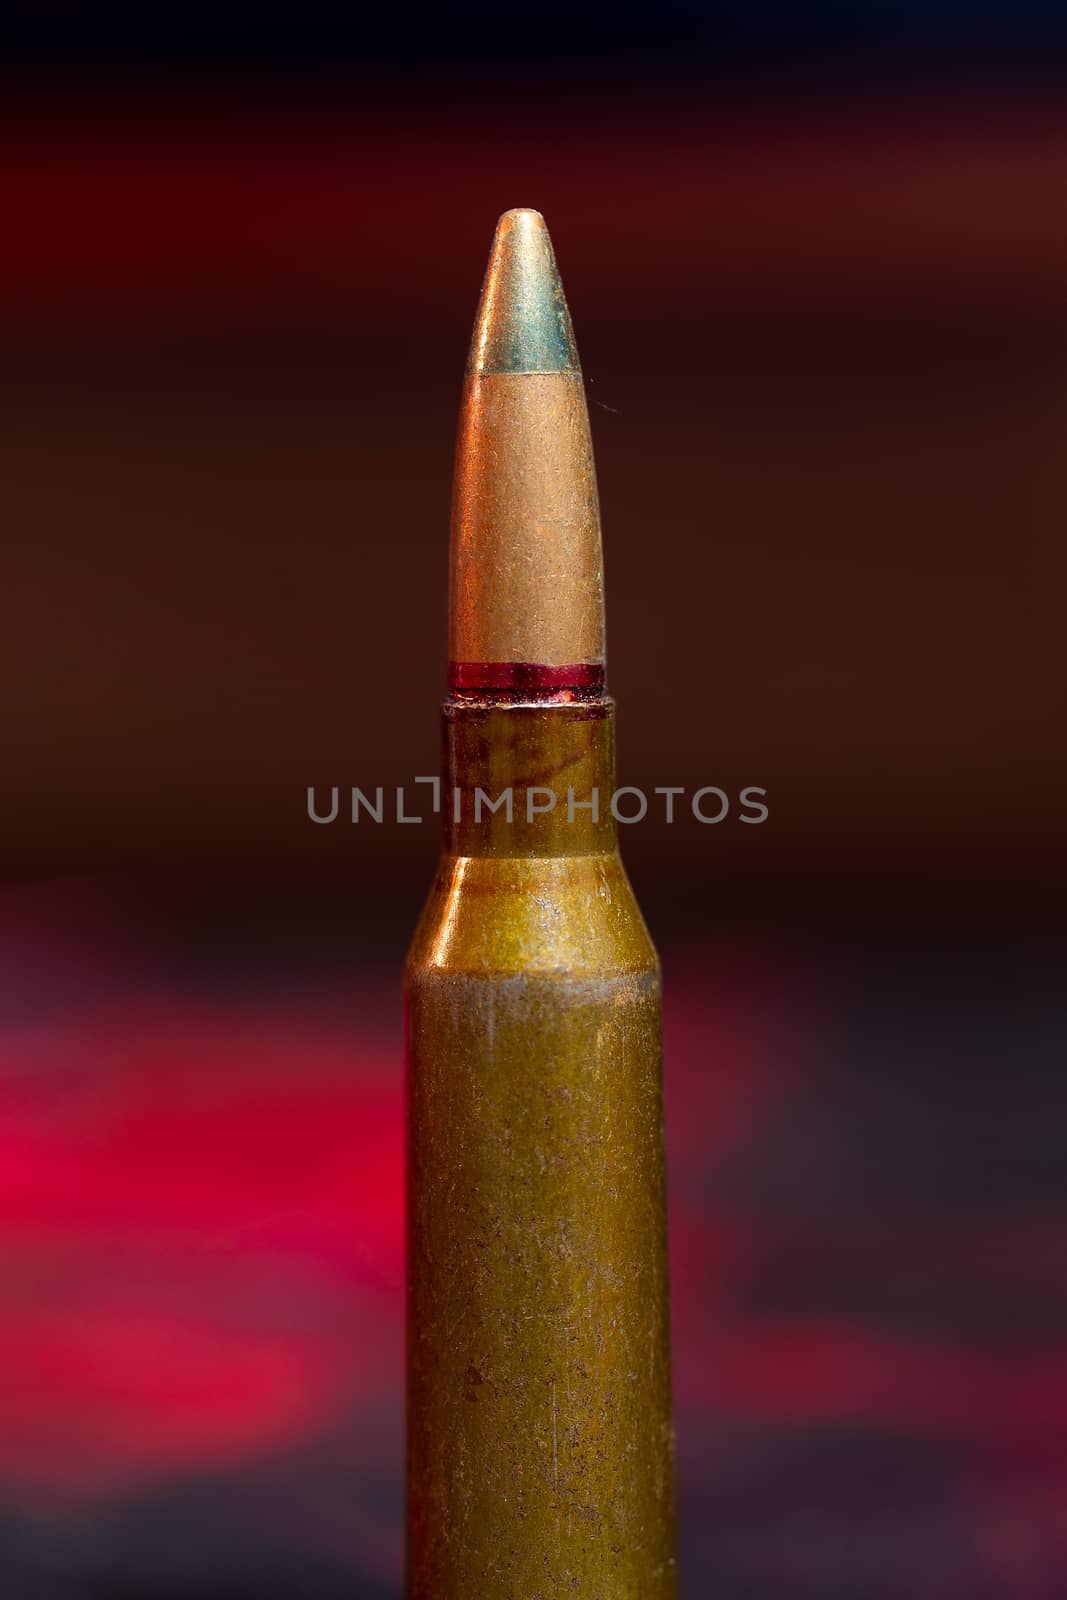 Rifle AK-47 ammo bullet close-up on blurred background. Armor piercing cartridge. by alexsdriver